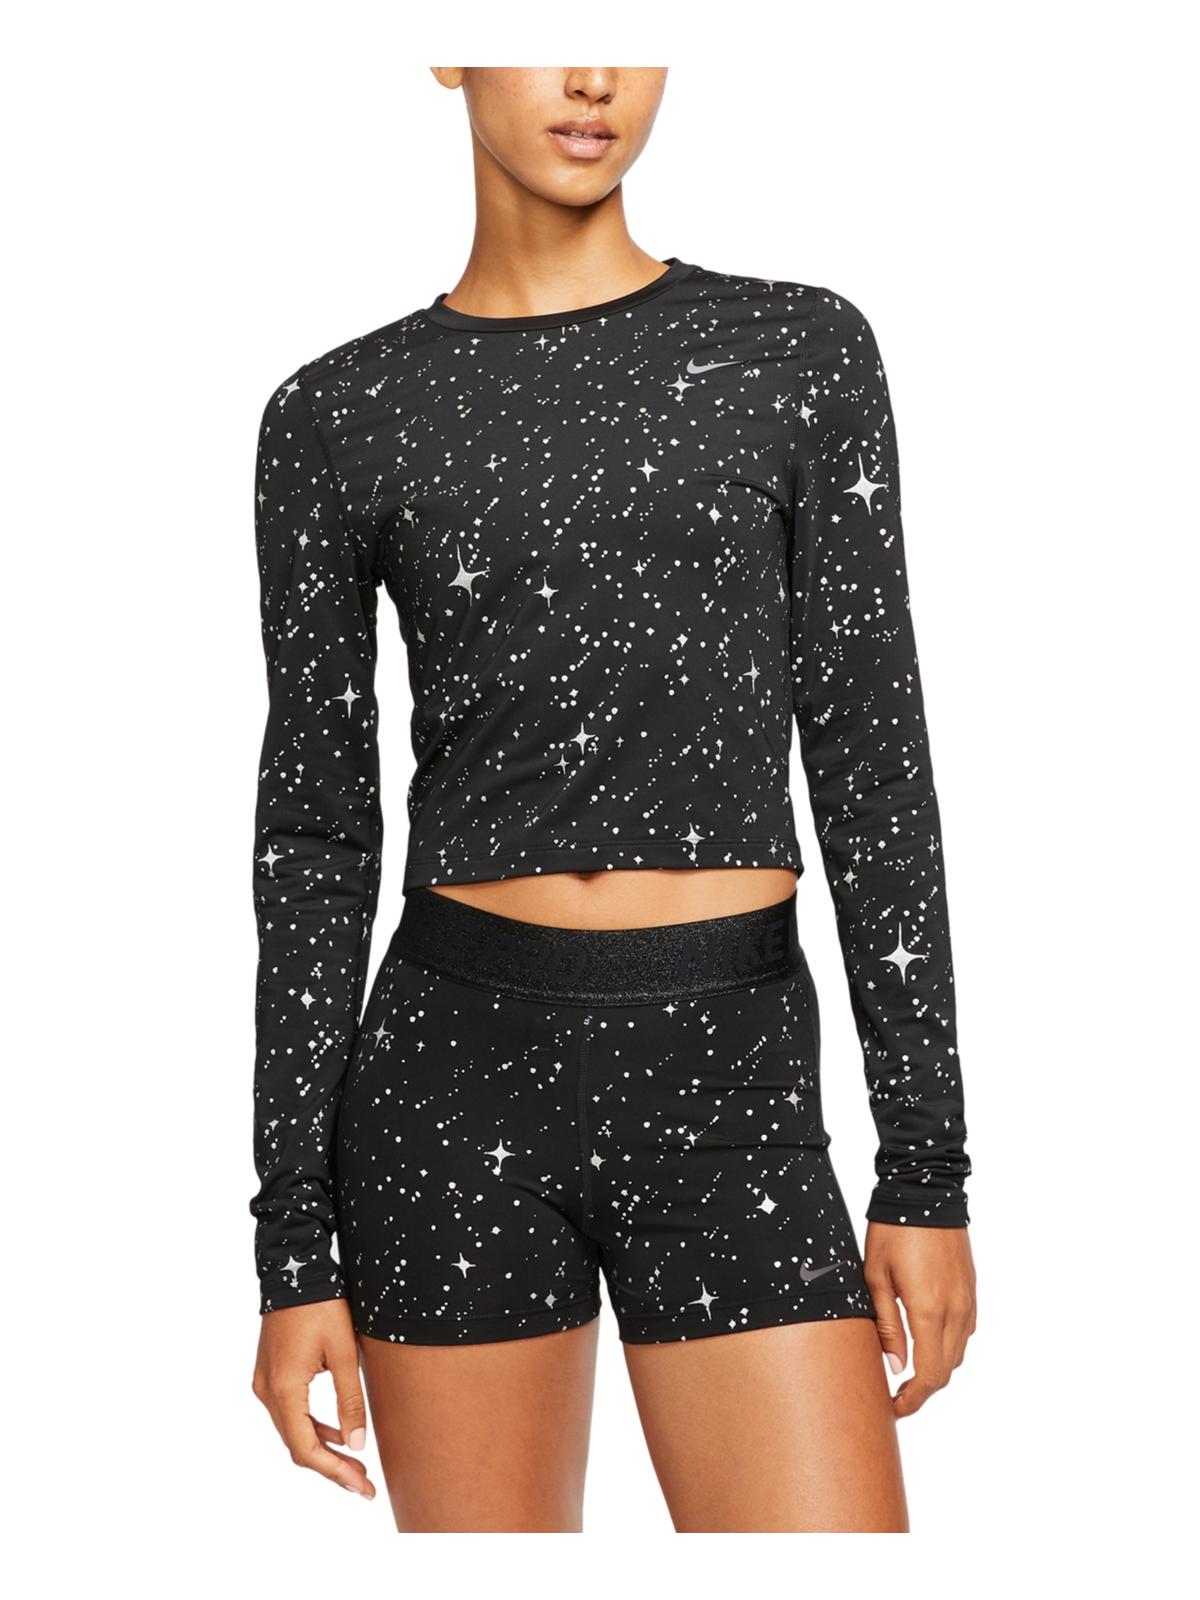 Nike Womens Starry Night Fitness Training Crop Top Black L - image 1 of 3